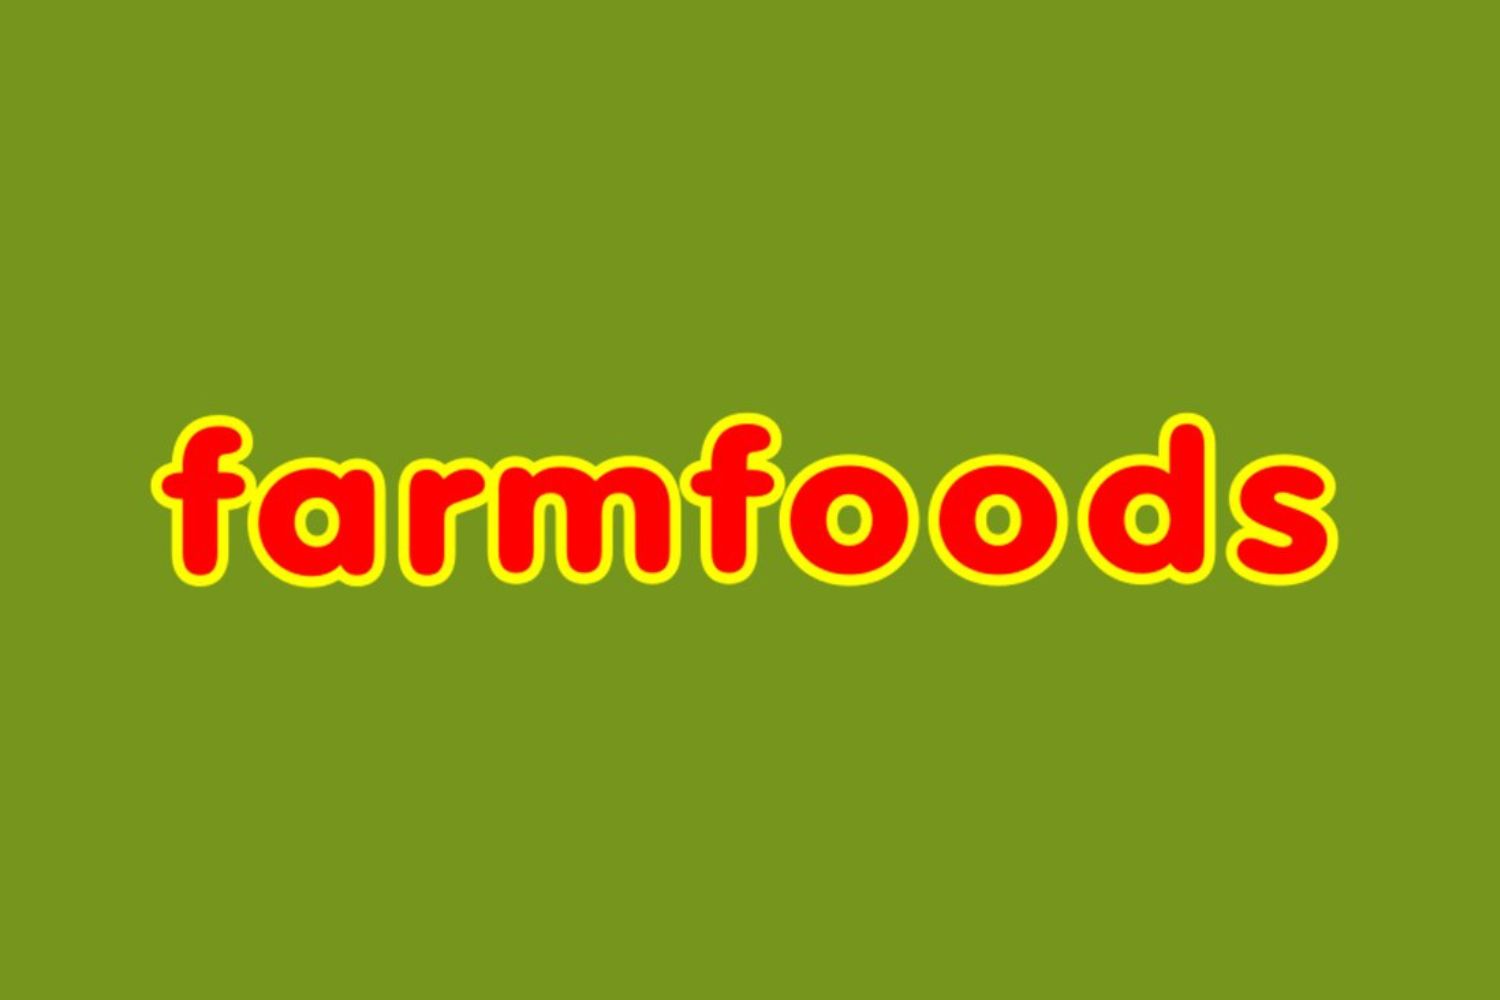 farmfoods offers